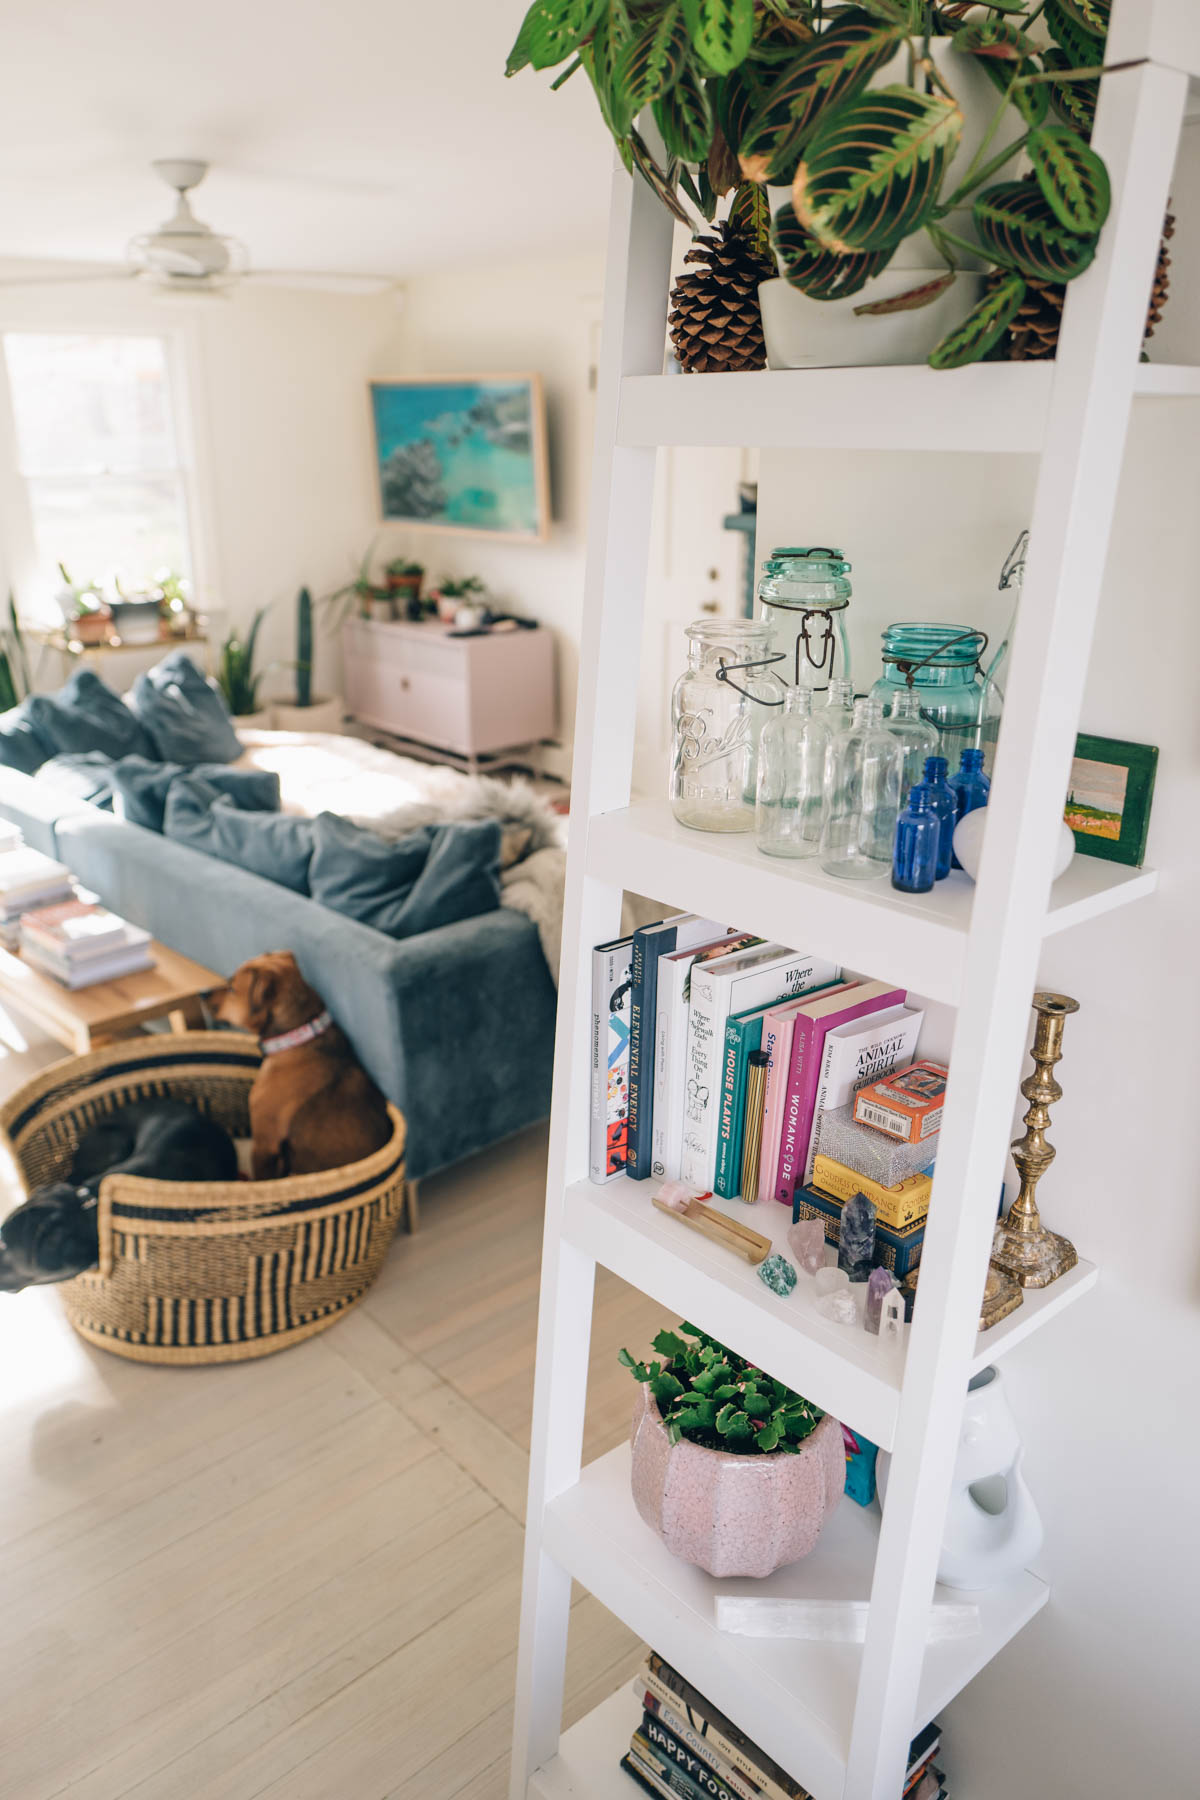 Jess Ann Kirby uses a Crate and Barrel Bookshelf to add a stylish divider to her open concept space